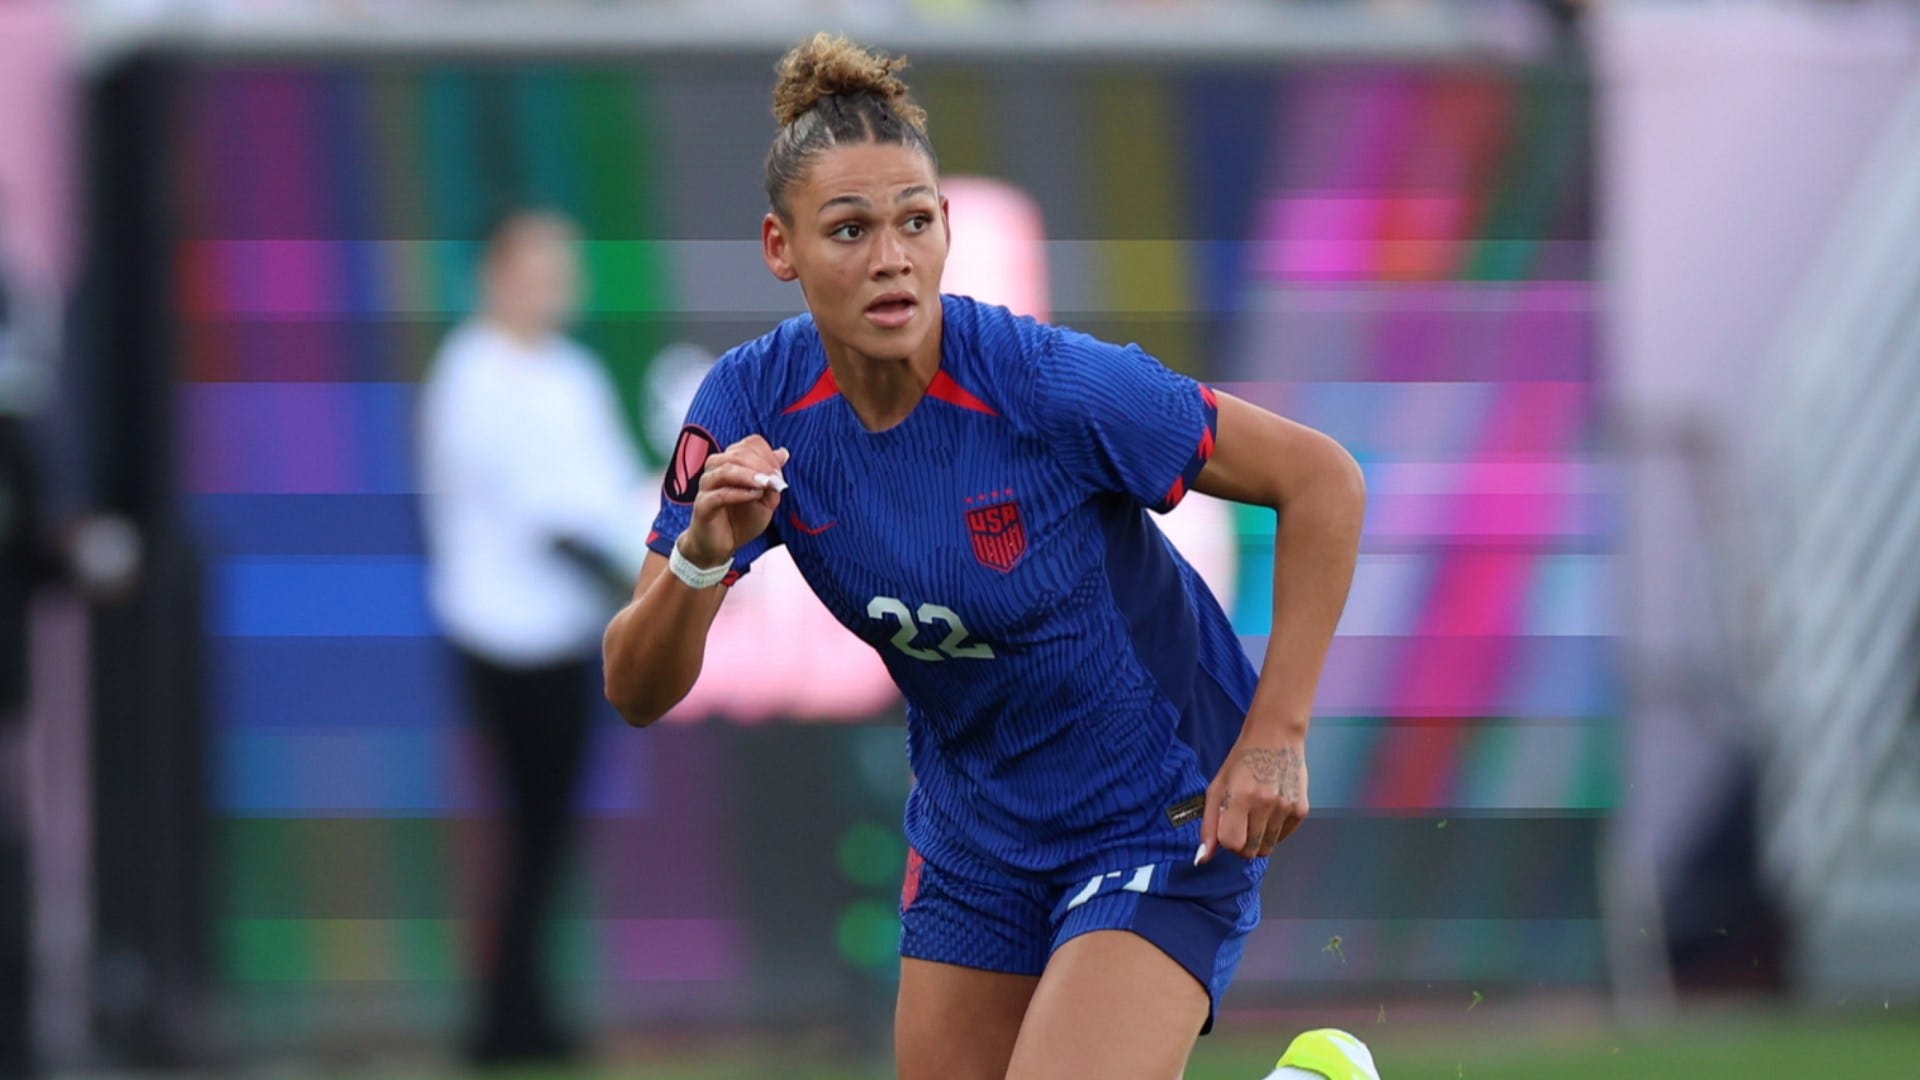 ‘The intensity could be felt’ - USWNT starlet Trinity Rodman opens up on ‘learning experience’ of World Cup despite eventual group-stage disappointment